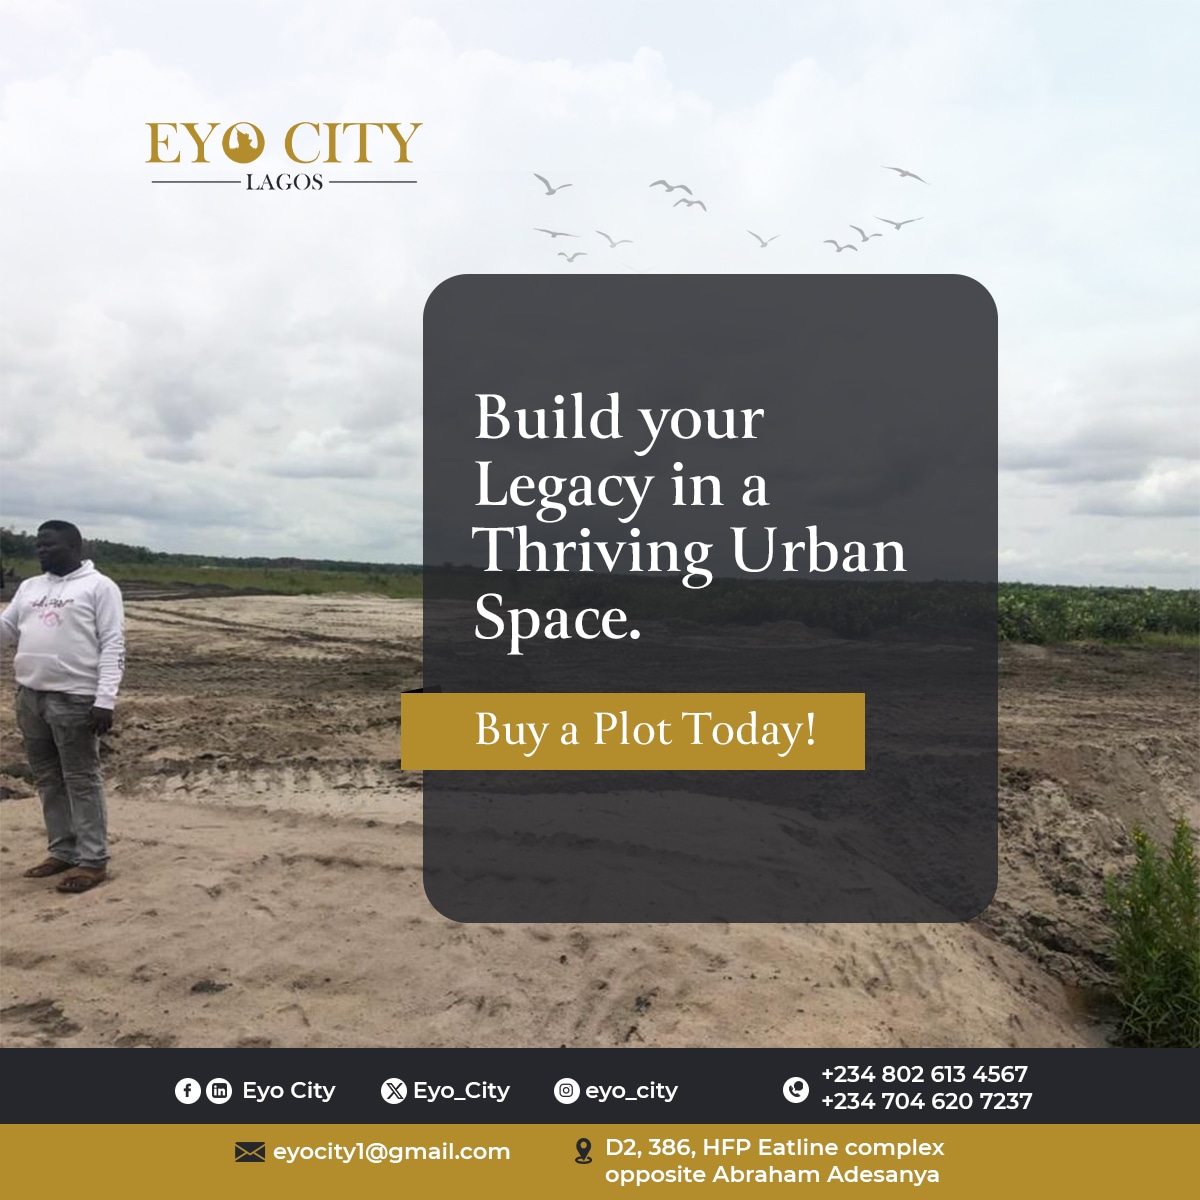 Secure your space for tomorrow's legacy. 
Invest in a plot today! 🏡 
Contact us @+234 802 613 4567, +234 704 620 7237 or send us a DM for more enquiry.

#EyoCity #Lagos #Lekki #Nigeria #realestate  #opportunity  #landproperties unilag #bbtvi #tuesdayvibe  #tuesdaymotivations